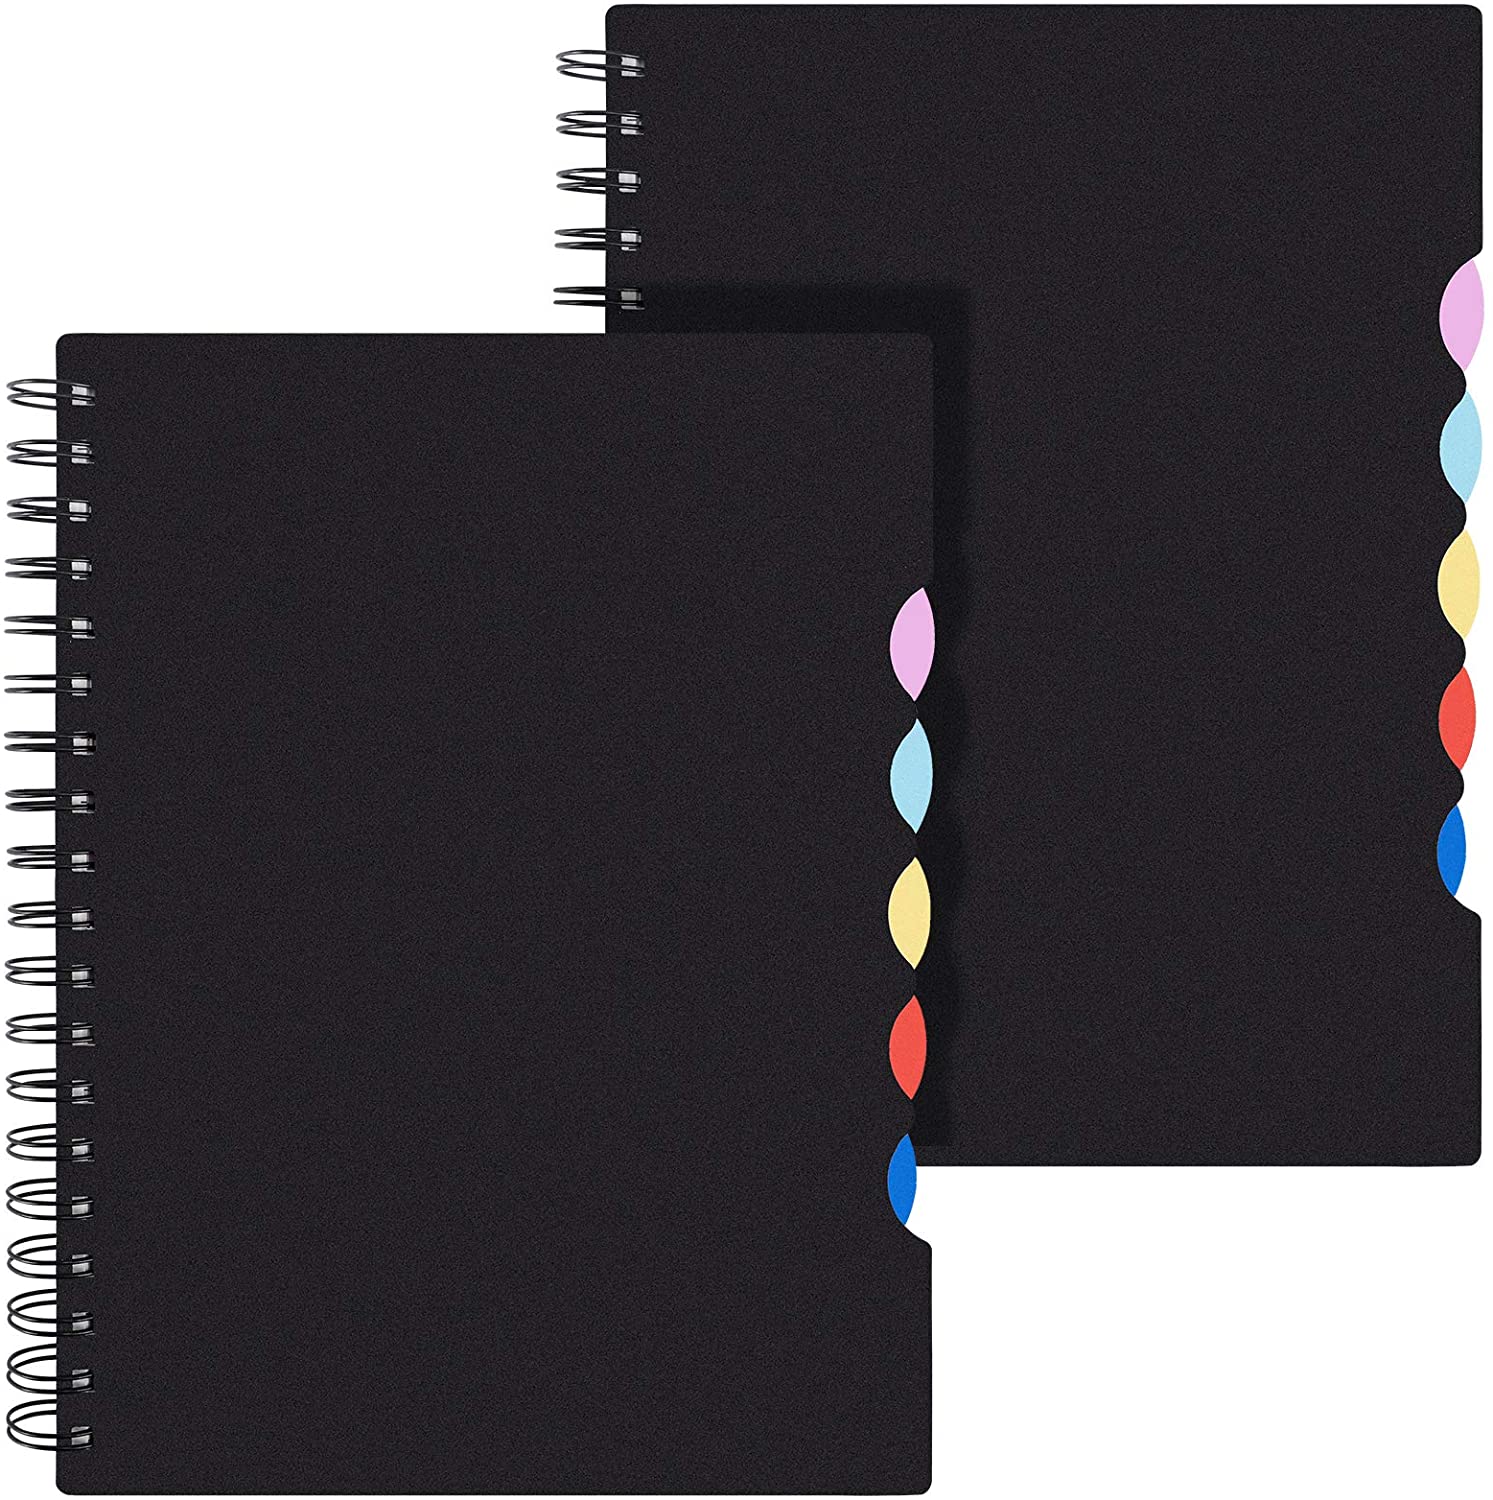 B5 Tabbed Spiral Notebook Lined Journals Ruled Notebooks